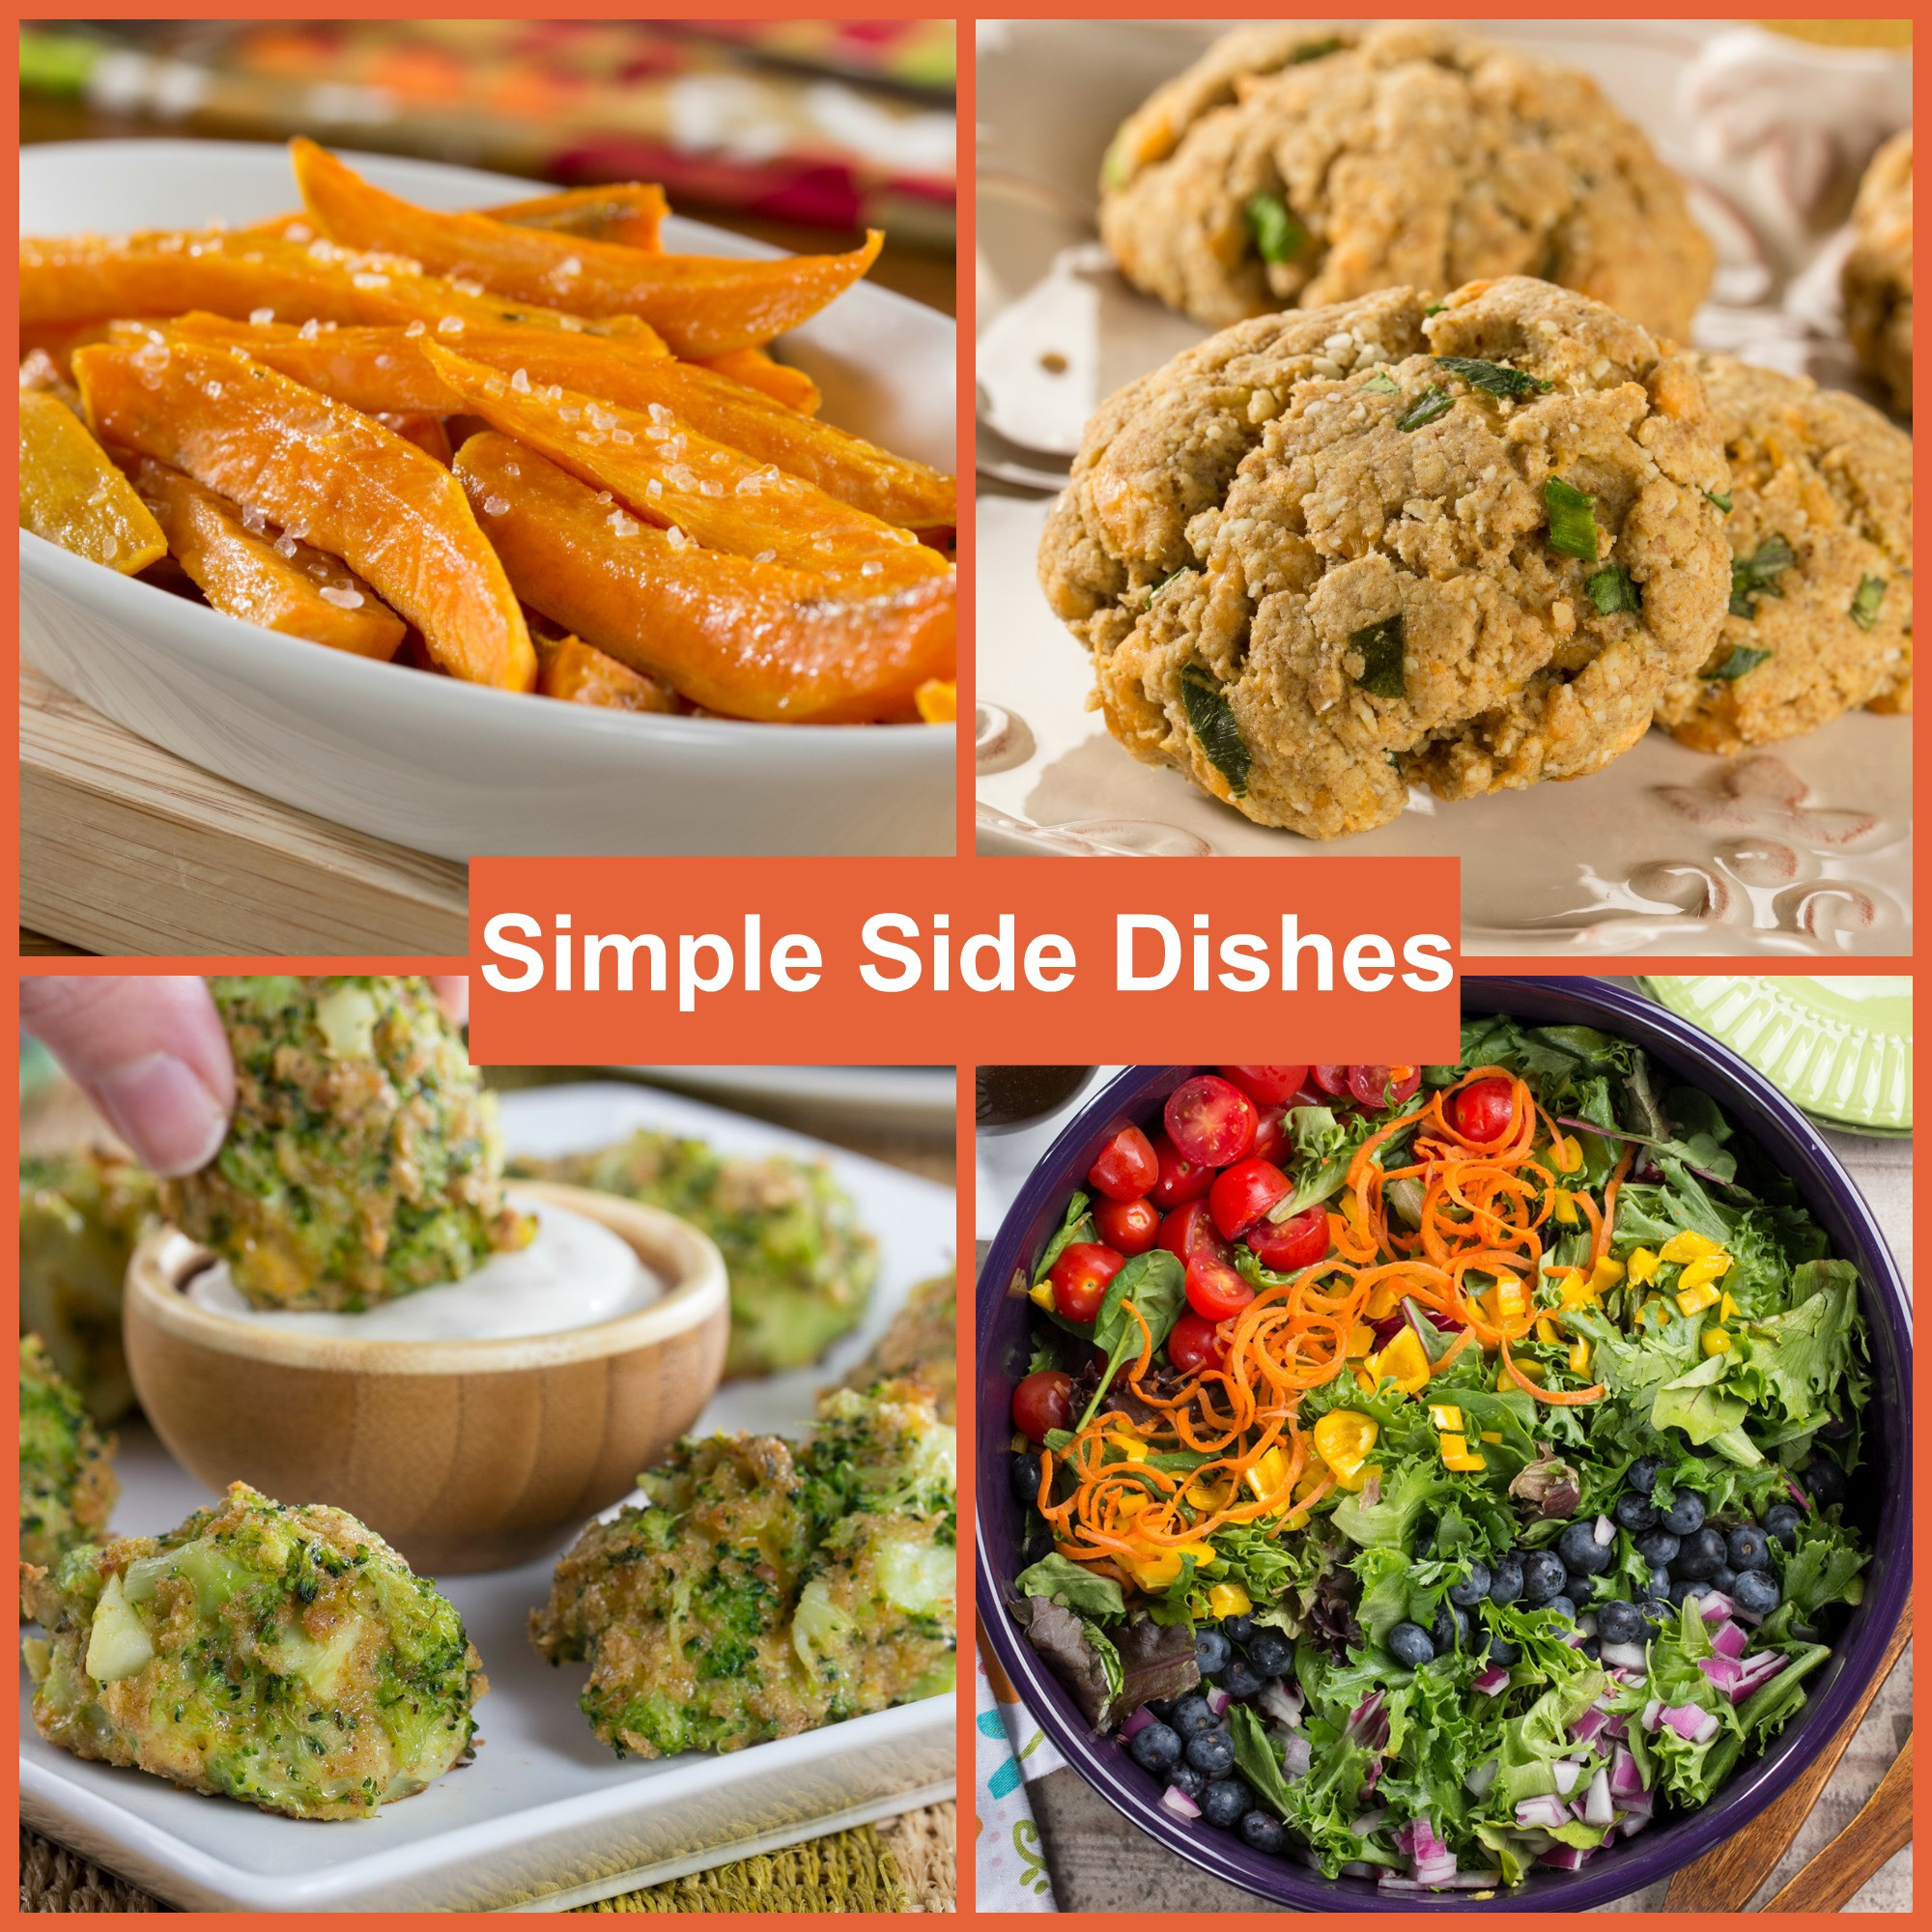 Simple Healthy Side Dishes
 Simple Side Dishes FREE eCookbook Mr Food s Blog